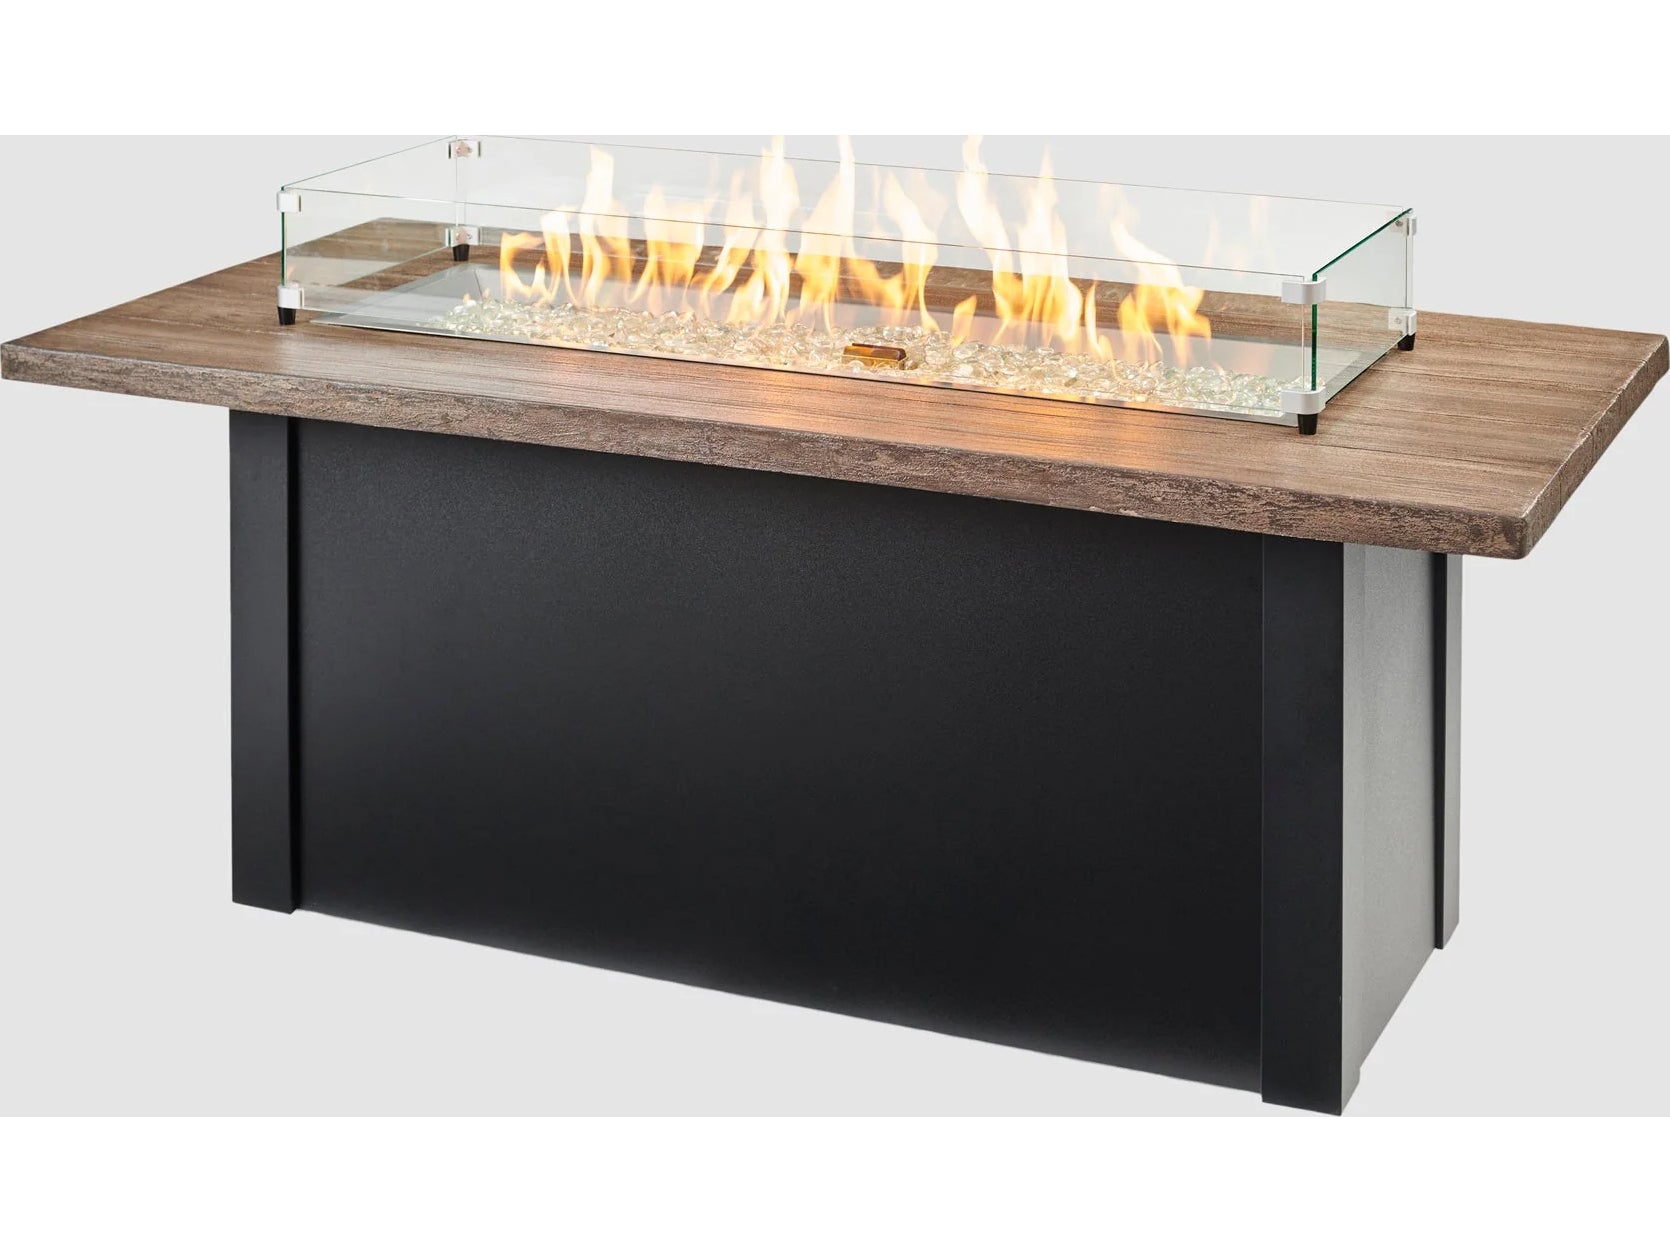 Outdoor Greatroom - 62’‘W x 30’'D - Havenwood Steel Luverne Black Rectangular Driftwood Everblend Top Gas Fire Pit Table - Direct Spark Ignition